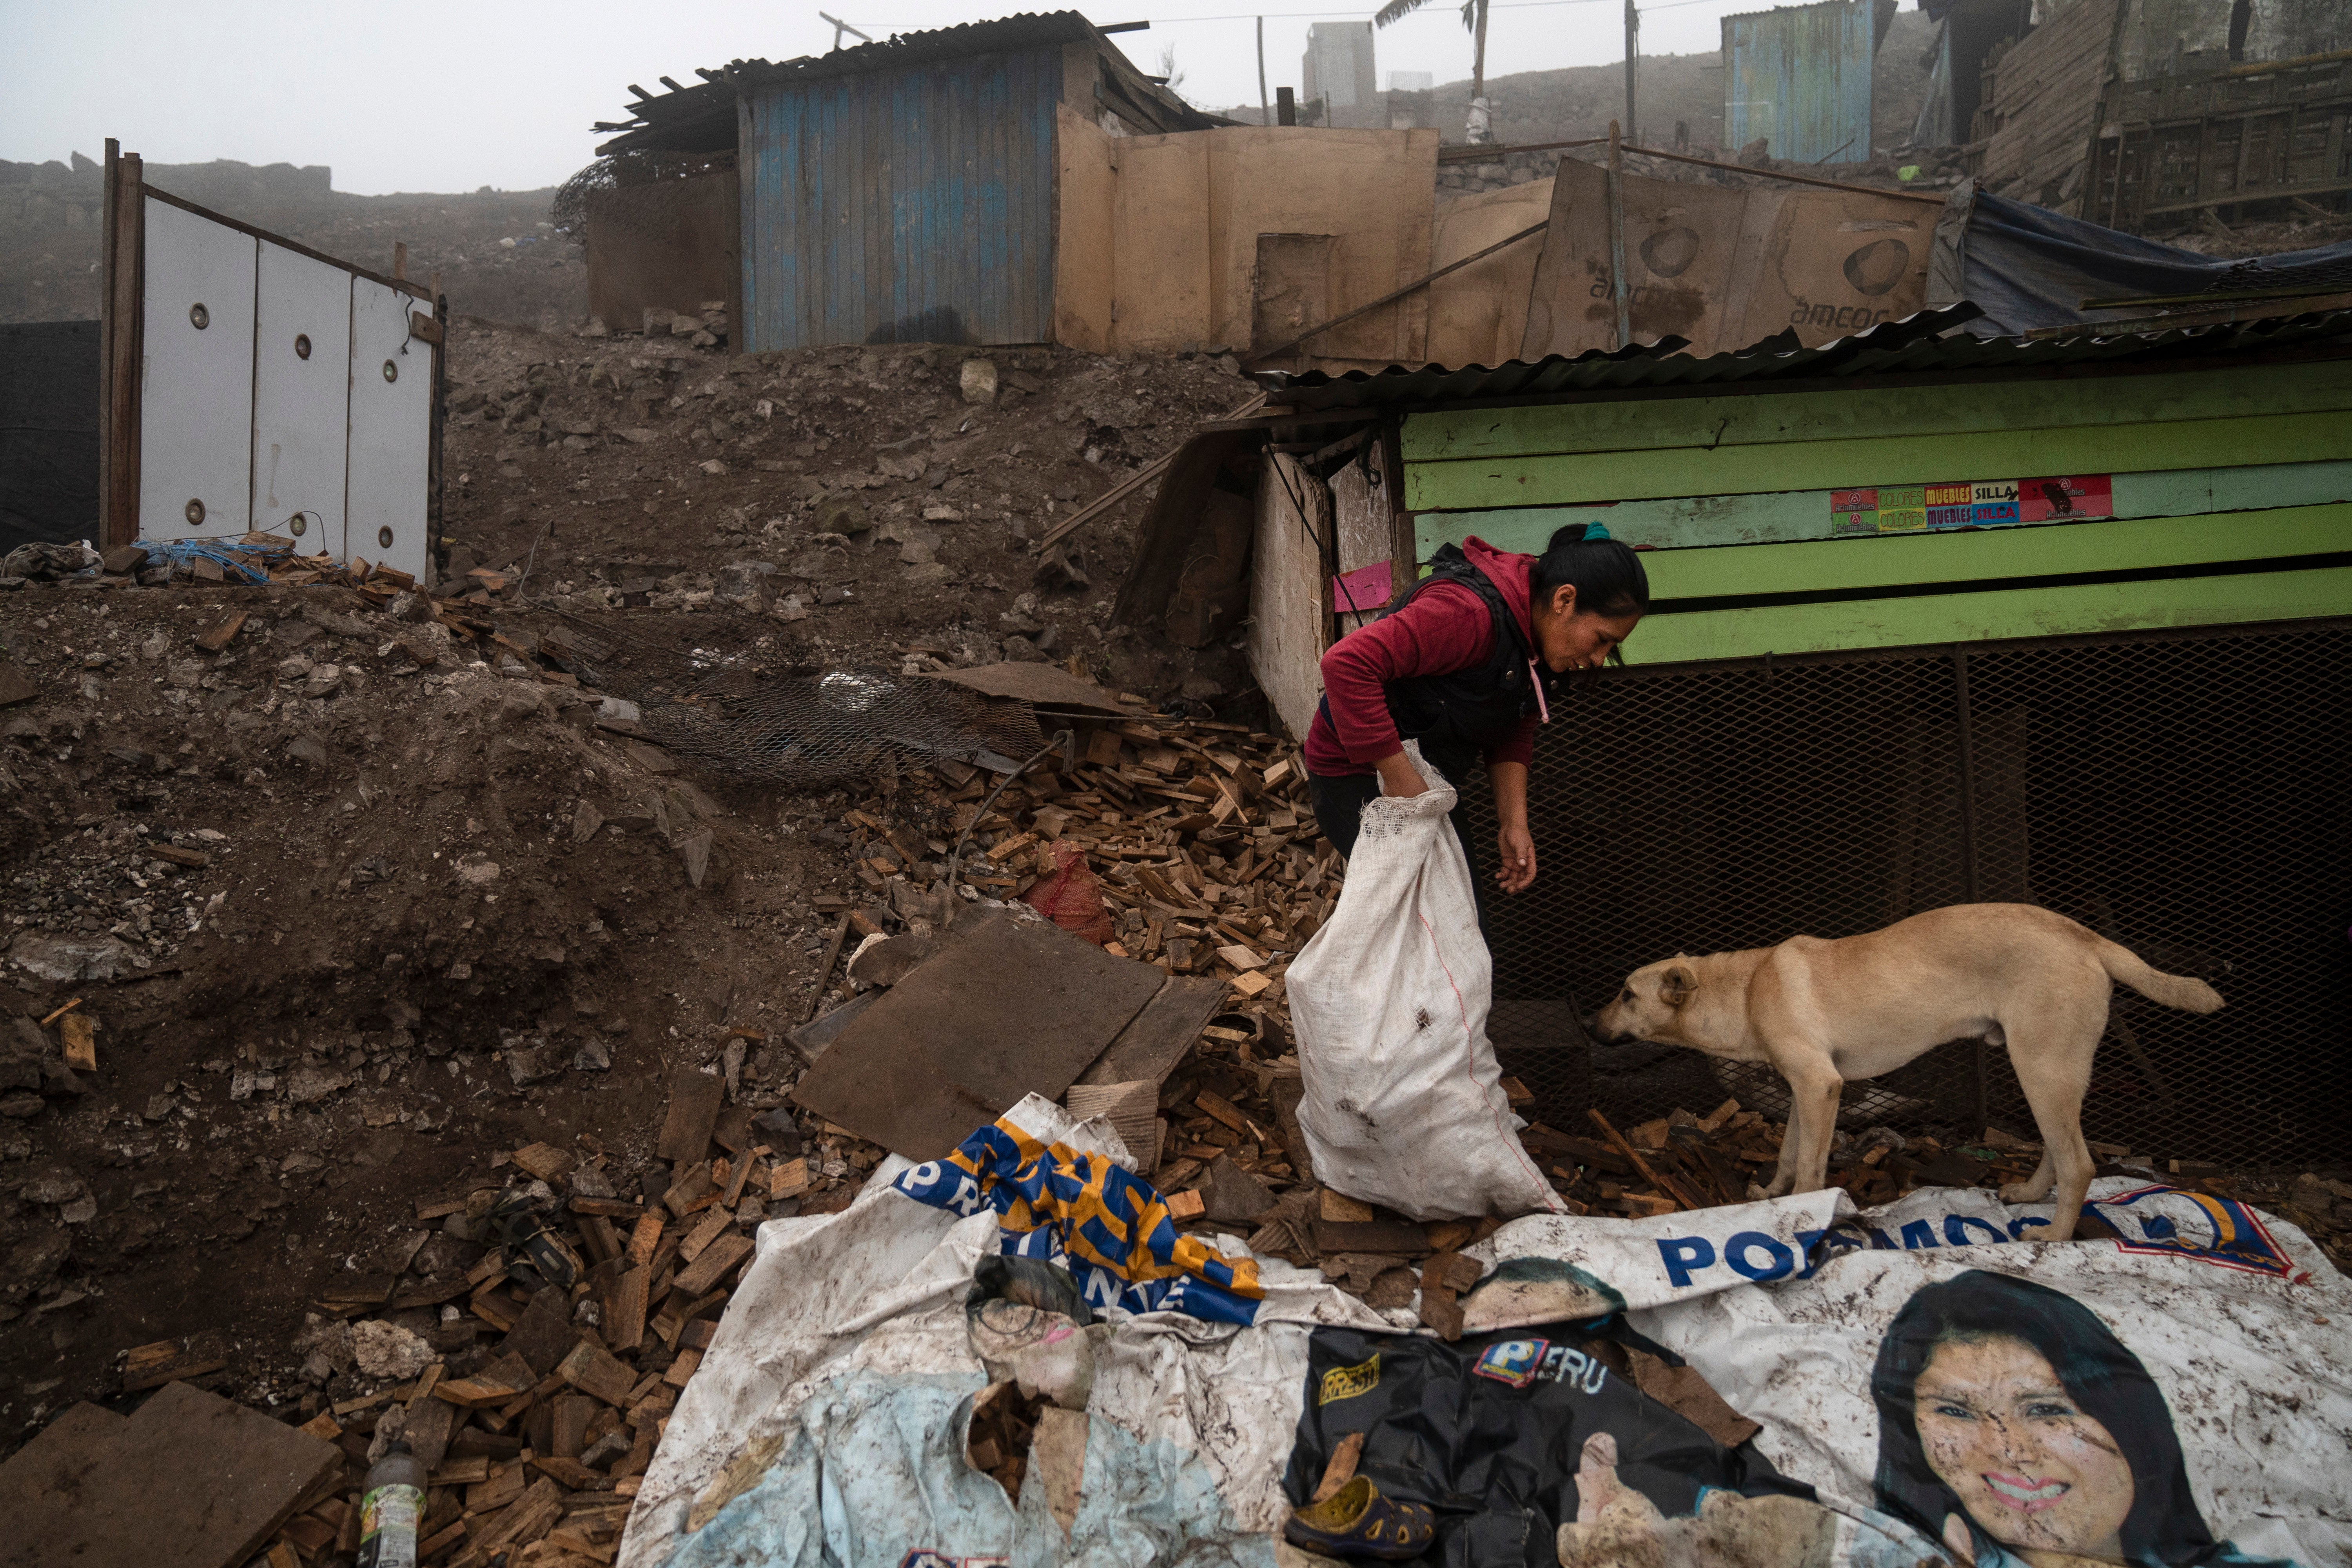 A woman gathers wood near a discarded campaign poster in the Lima slum of Goshen City